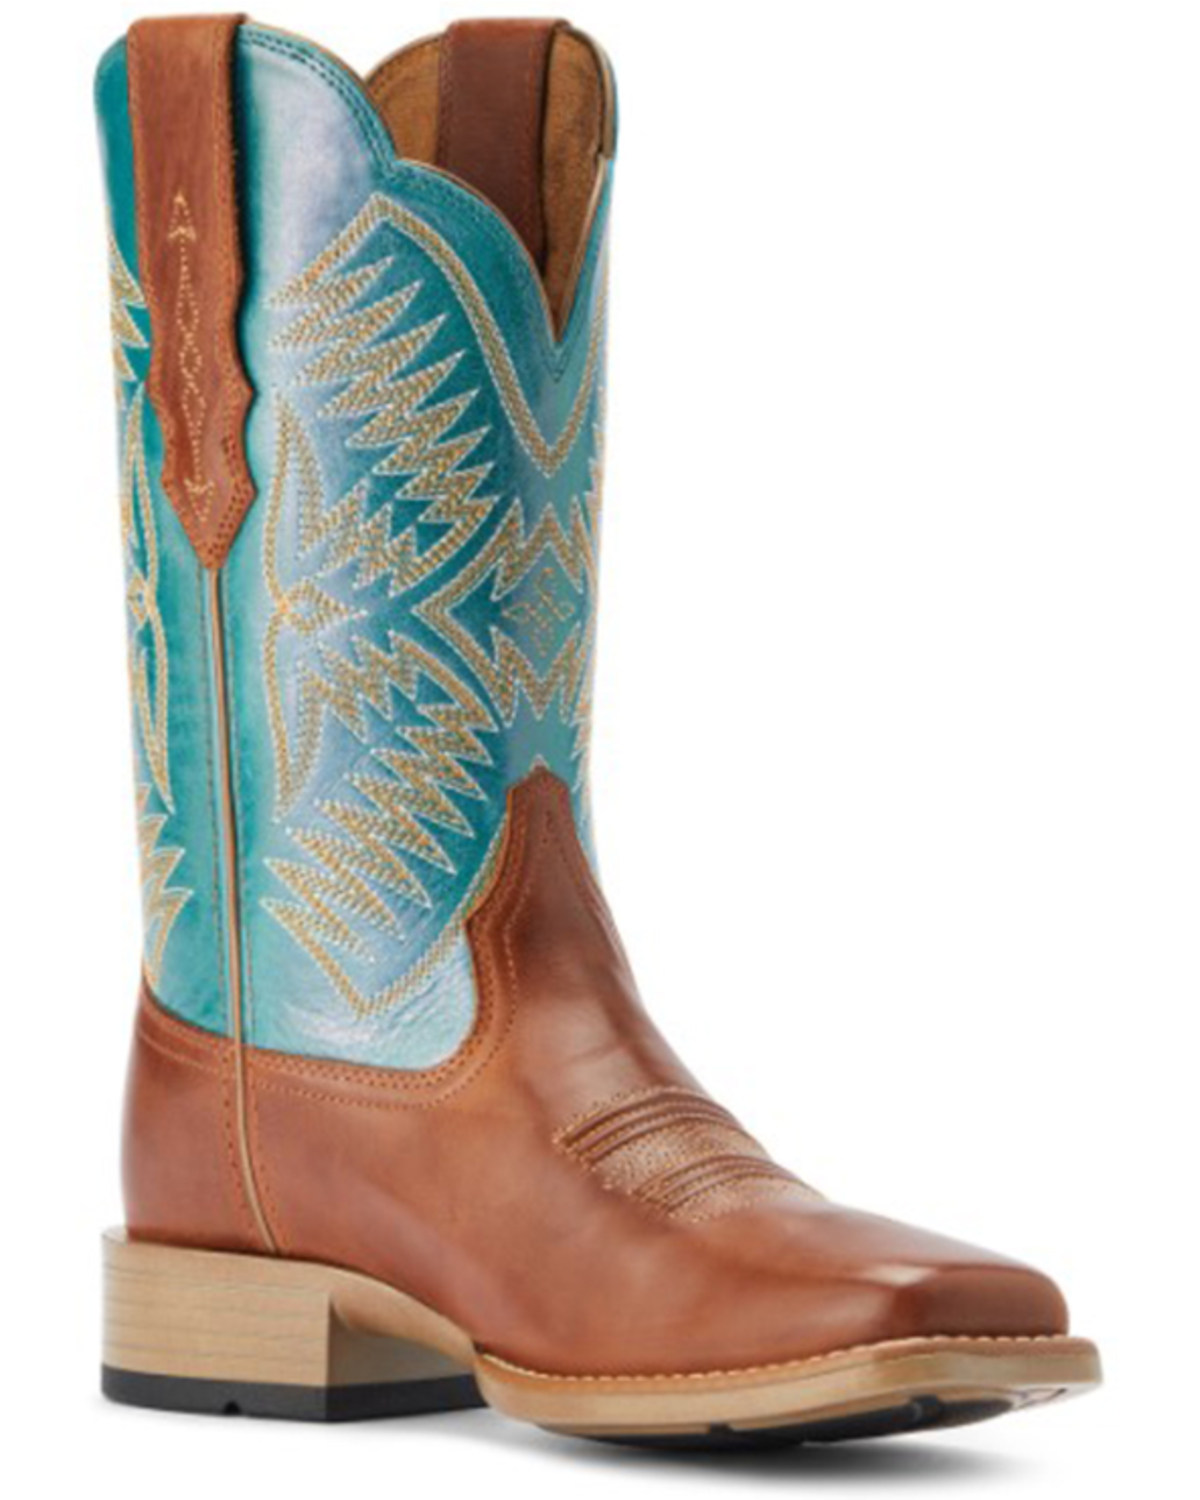 Ariat Women's Odessa Stretchfit Performance Western Boots - Broad Square Toe